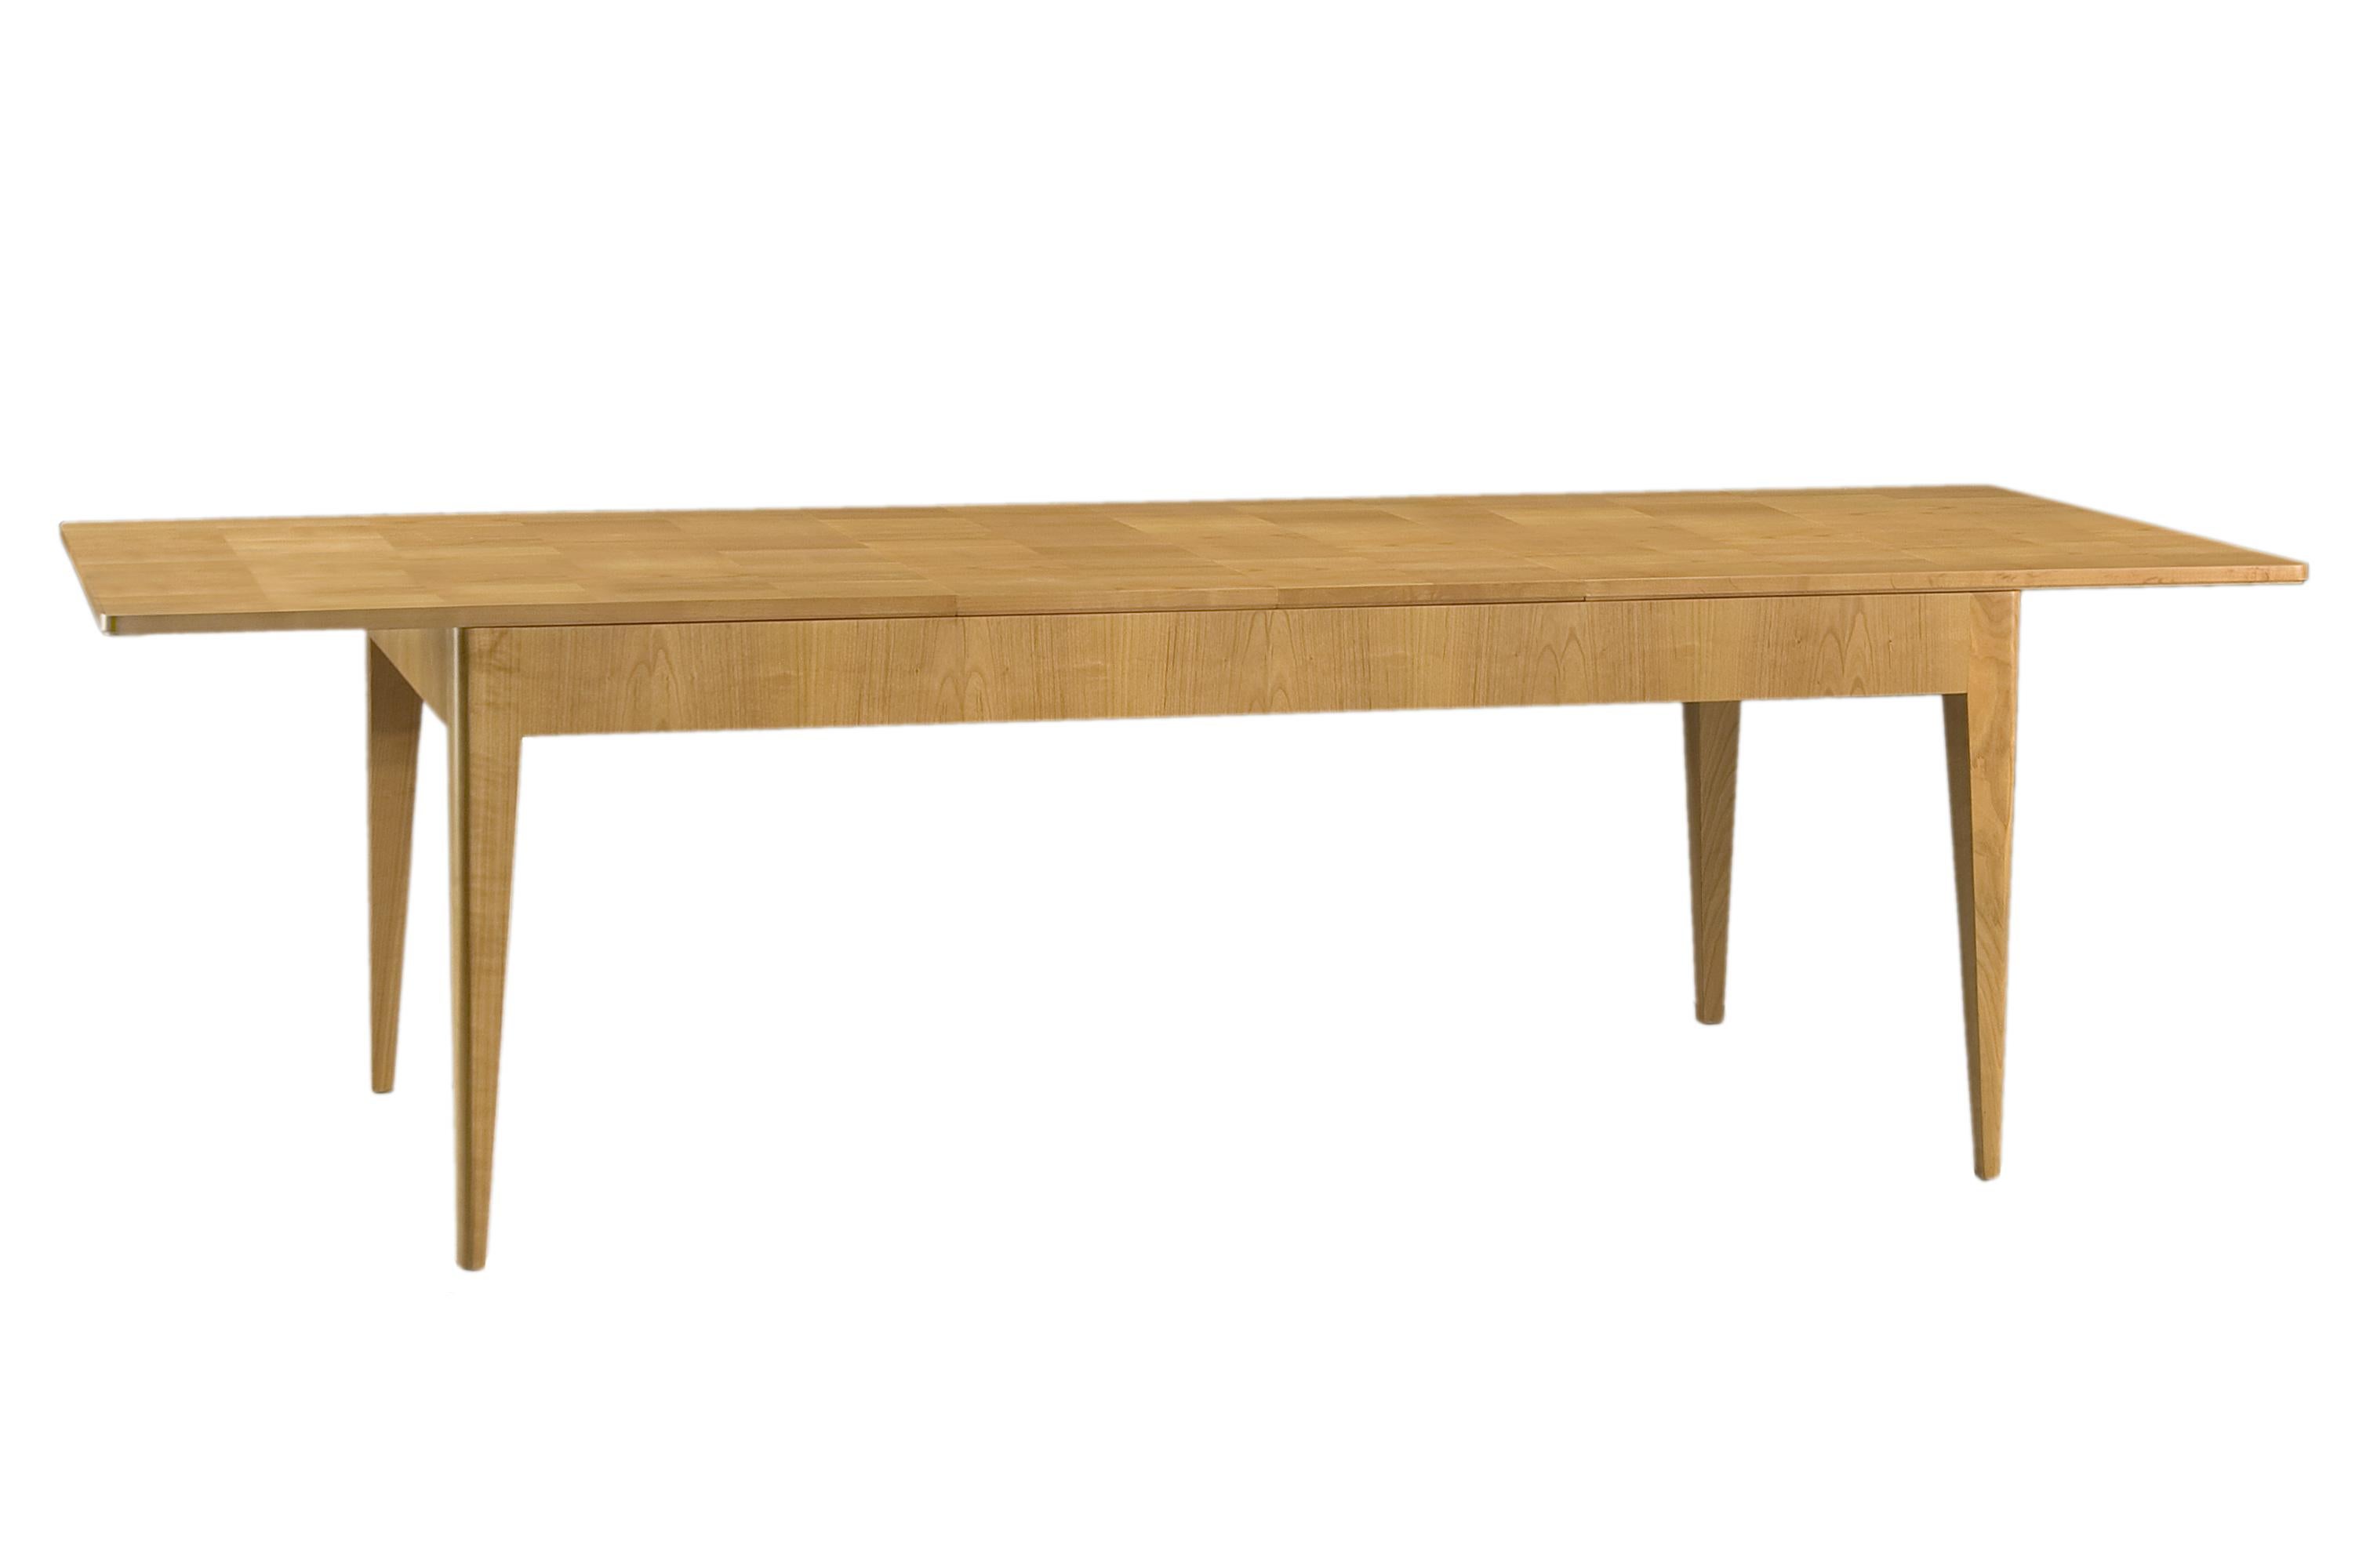 extendable table made of cherry wood.
Precious veneer top.
Manufactured by Morelato